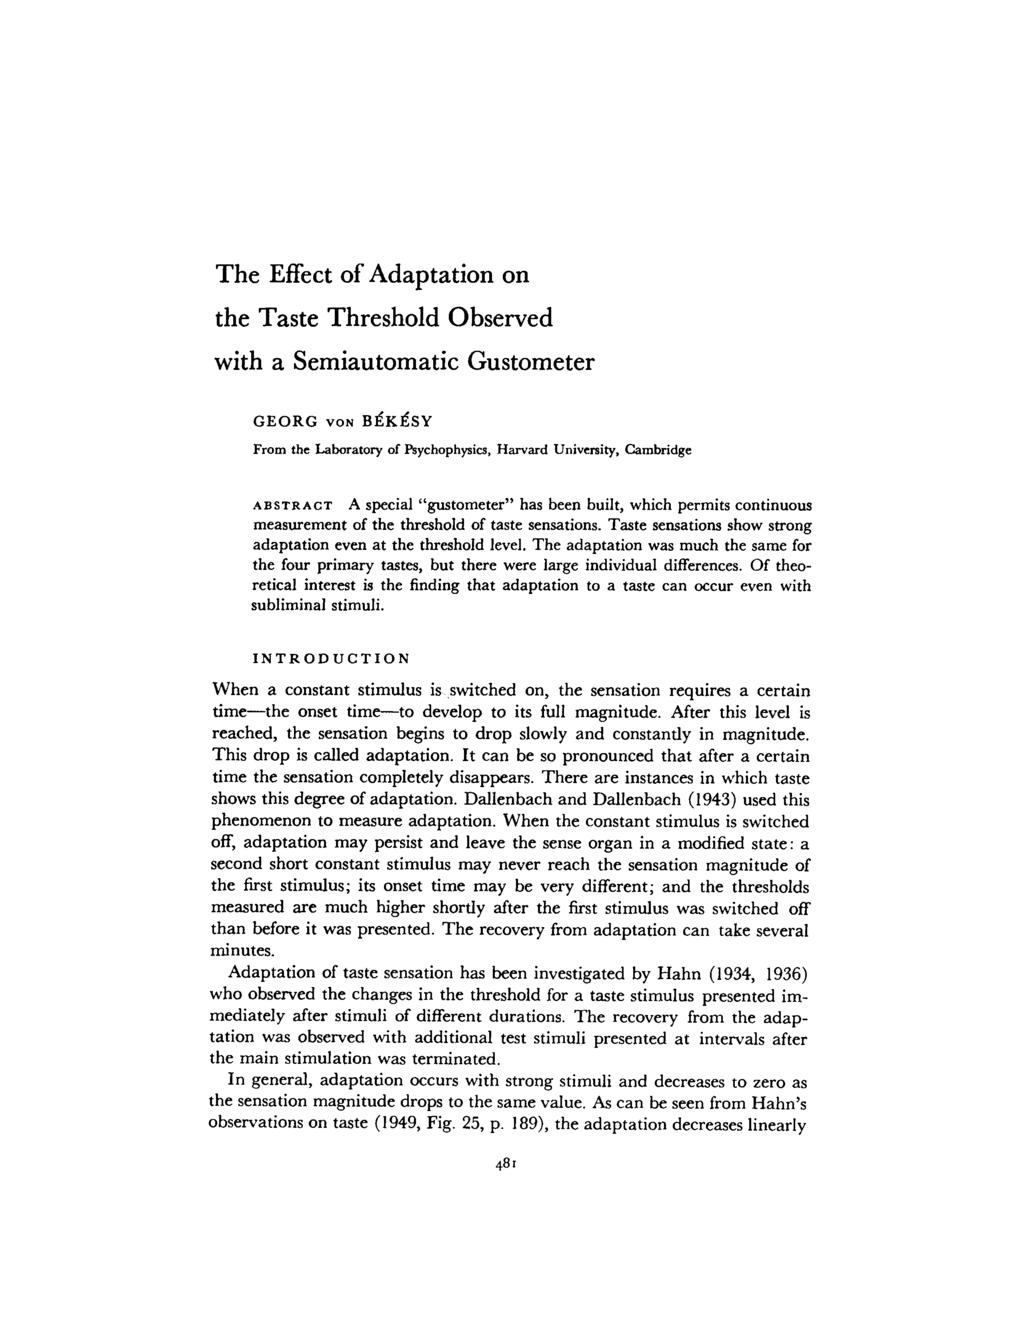 The Effect of Adaptation on the Taste Threshold Observed with a Semiautomatic Gustometer GEORG VON BEK9SY From the Laboratory of Psychophysics, Harvard University, Cambridge ABSTRACT A special